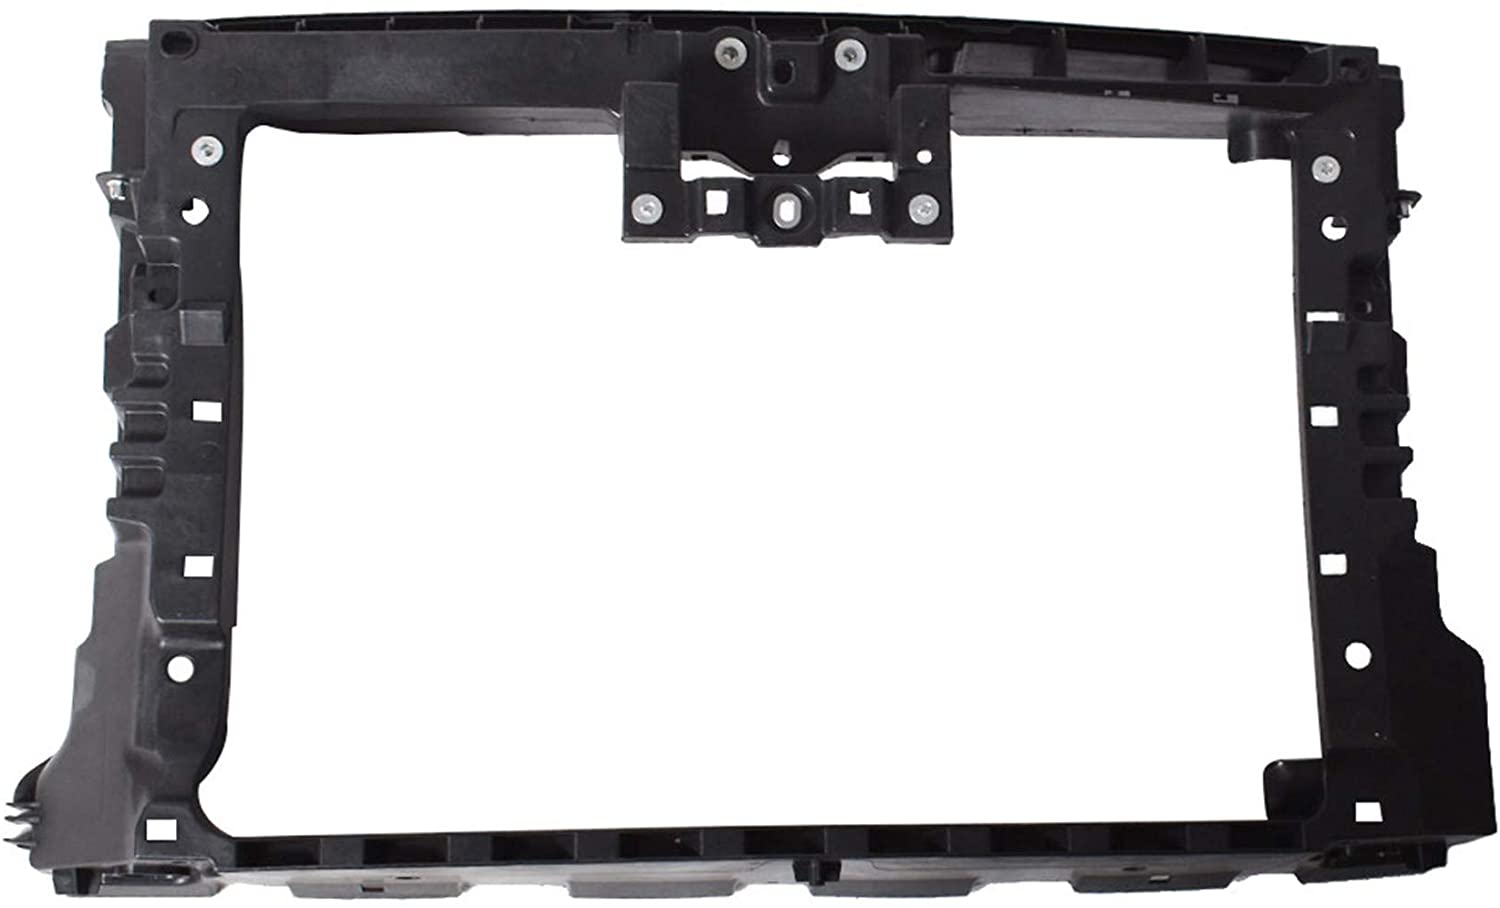 labwork Radiator Support Assembly VW1225138 Replacement for 2012-2015 Volkswagen Passat 561805588B9B9